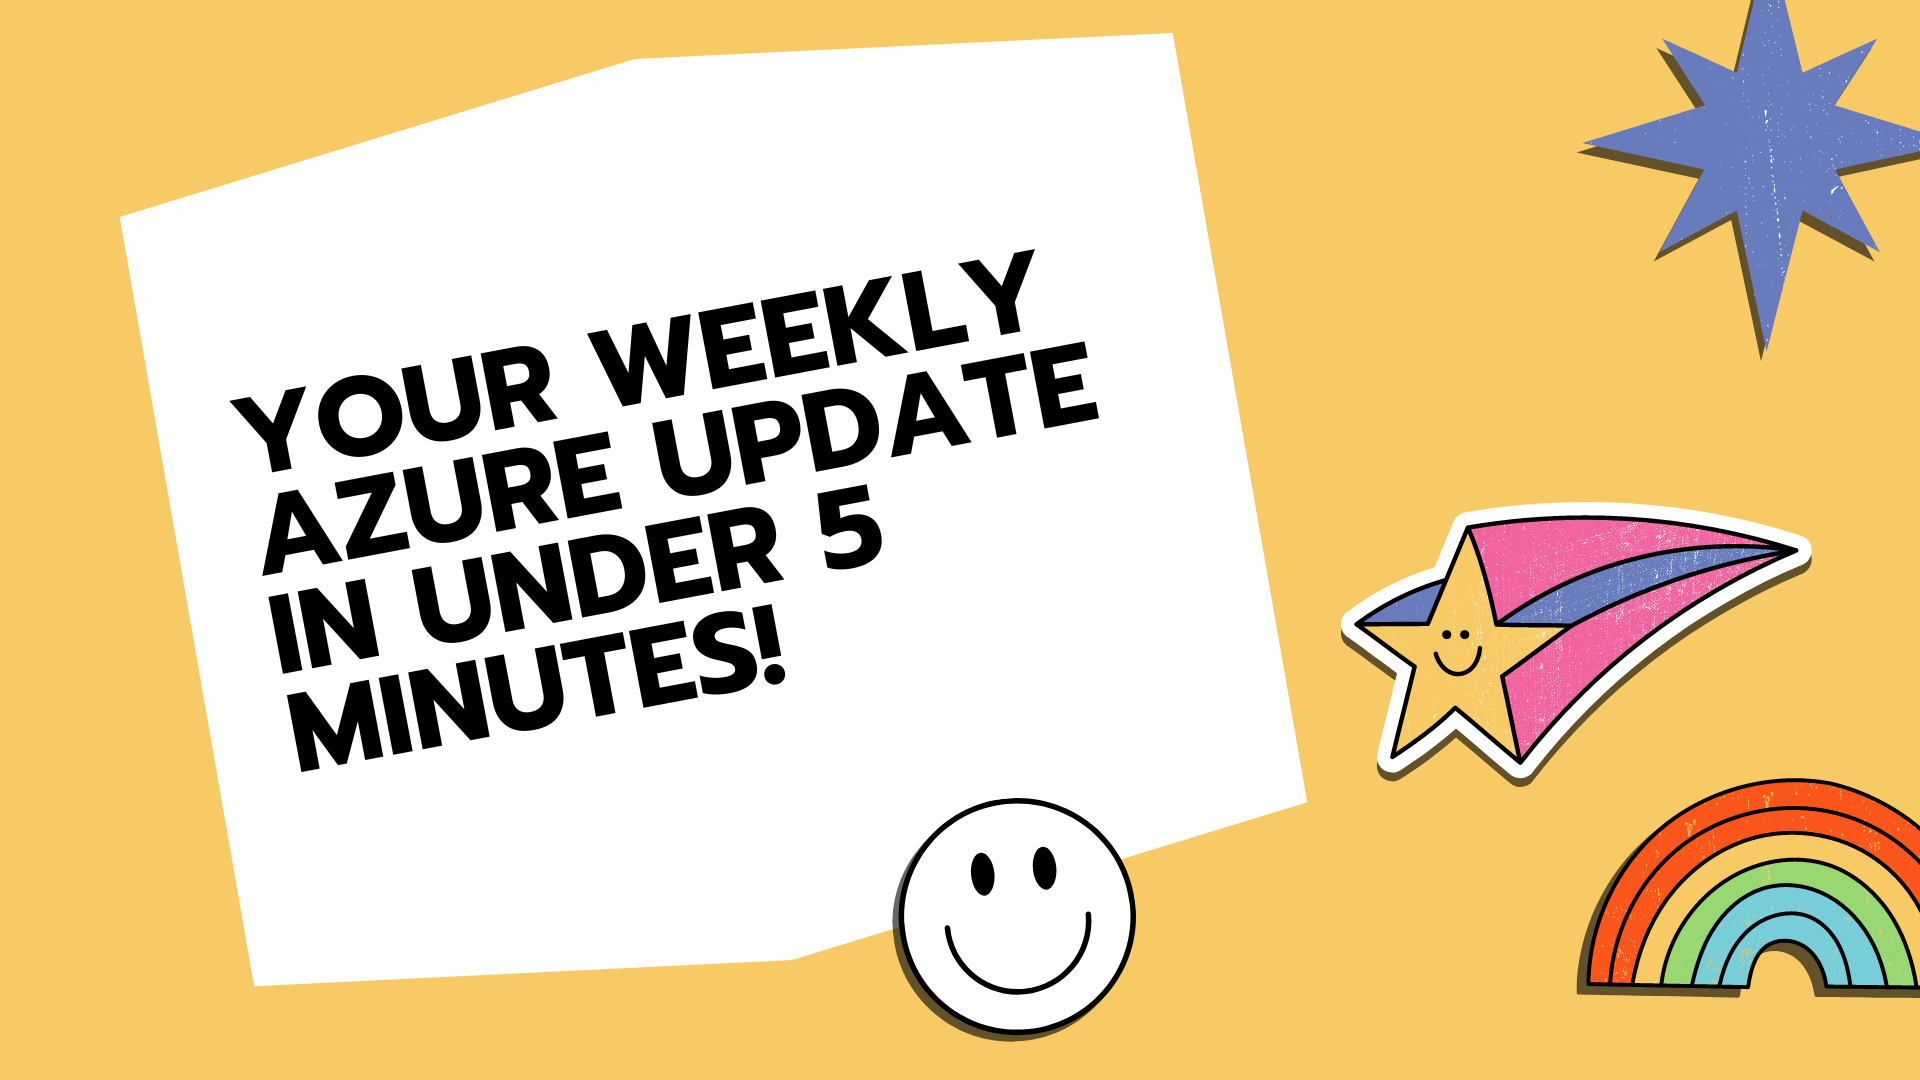 Your Weekly Azure Update in Under 5 Minutes!